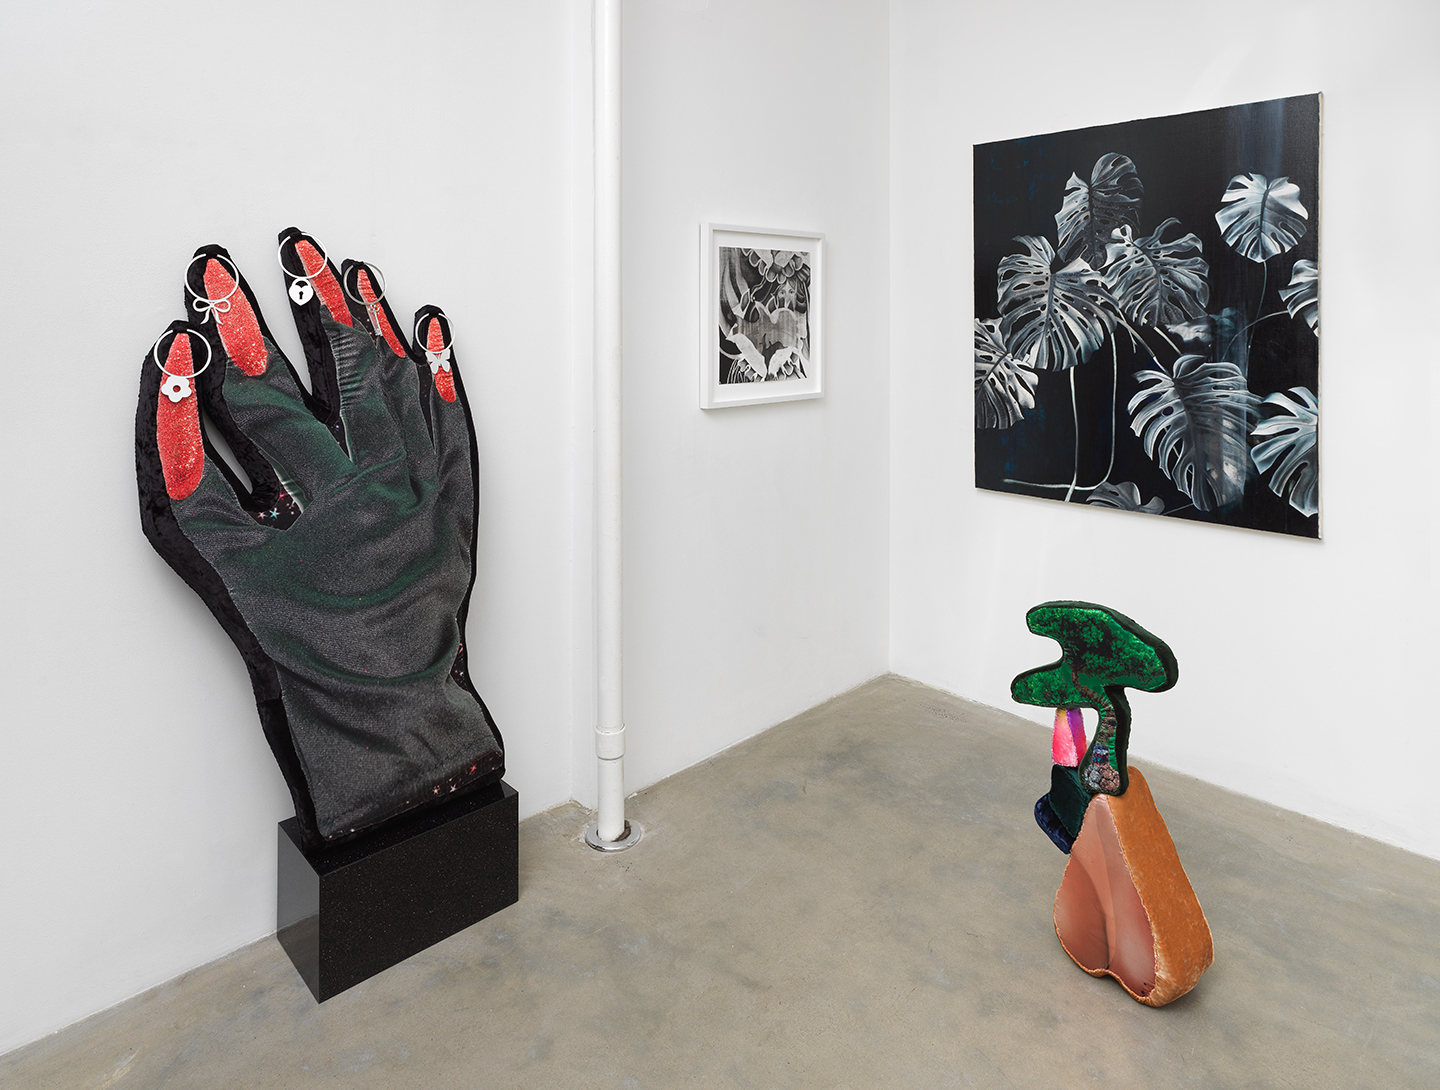 Installation view with digitally printed soft sculptures by Florencia Escudero and paintings and works on paper by Marcela Flórido